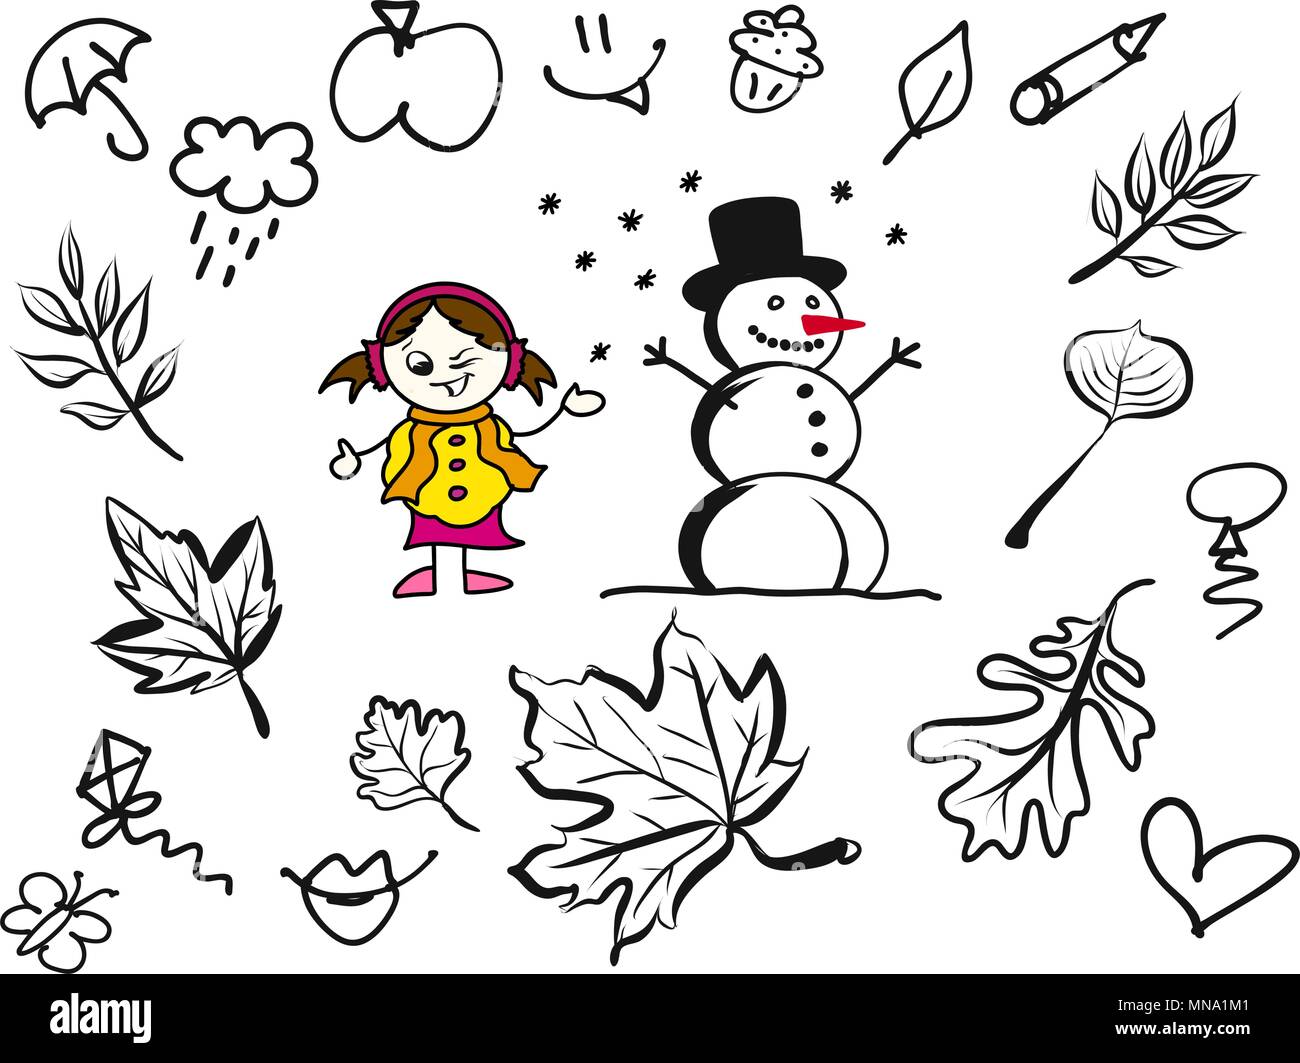 Little Comic Girl and Snowman with various sketched Leaves, Hand-drawn Vector Outline Art Doodles Stock Vector